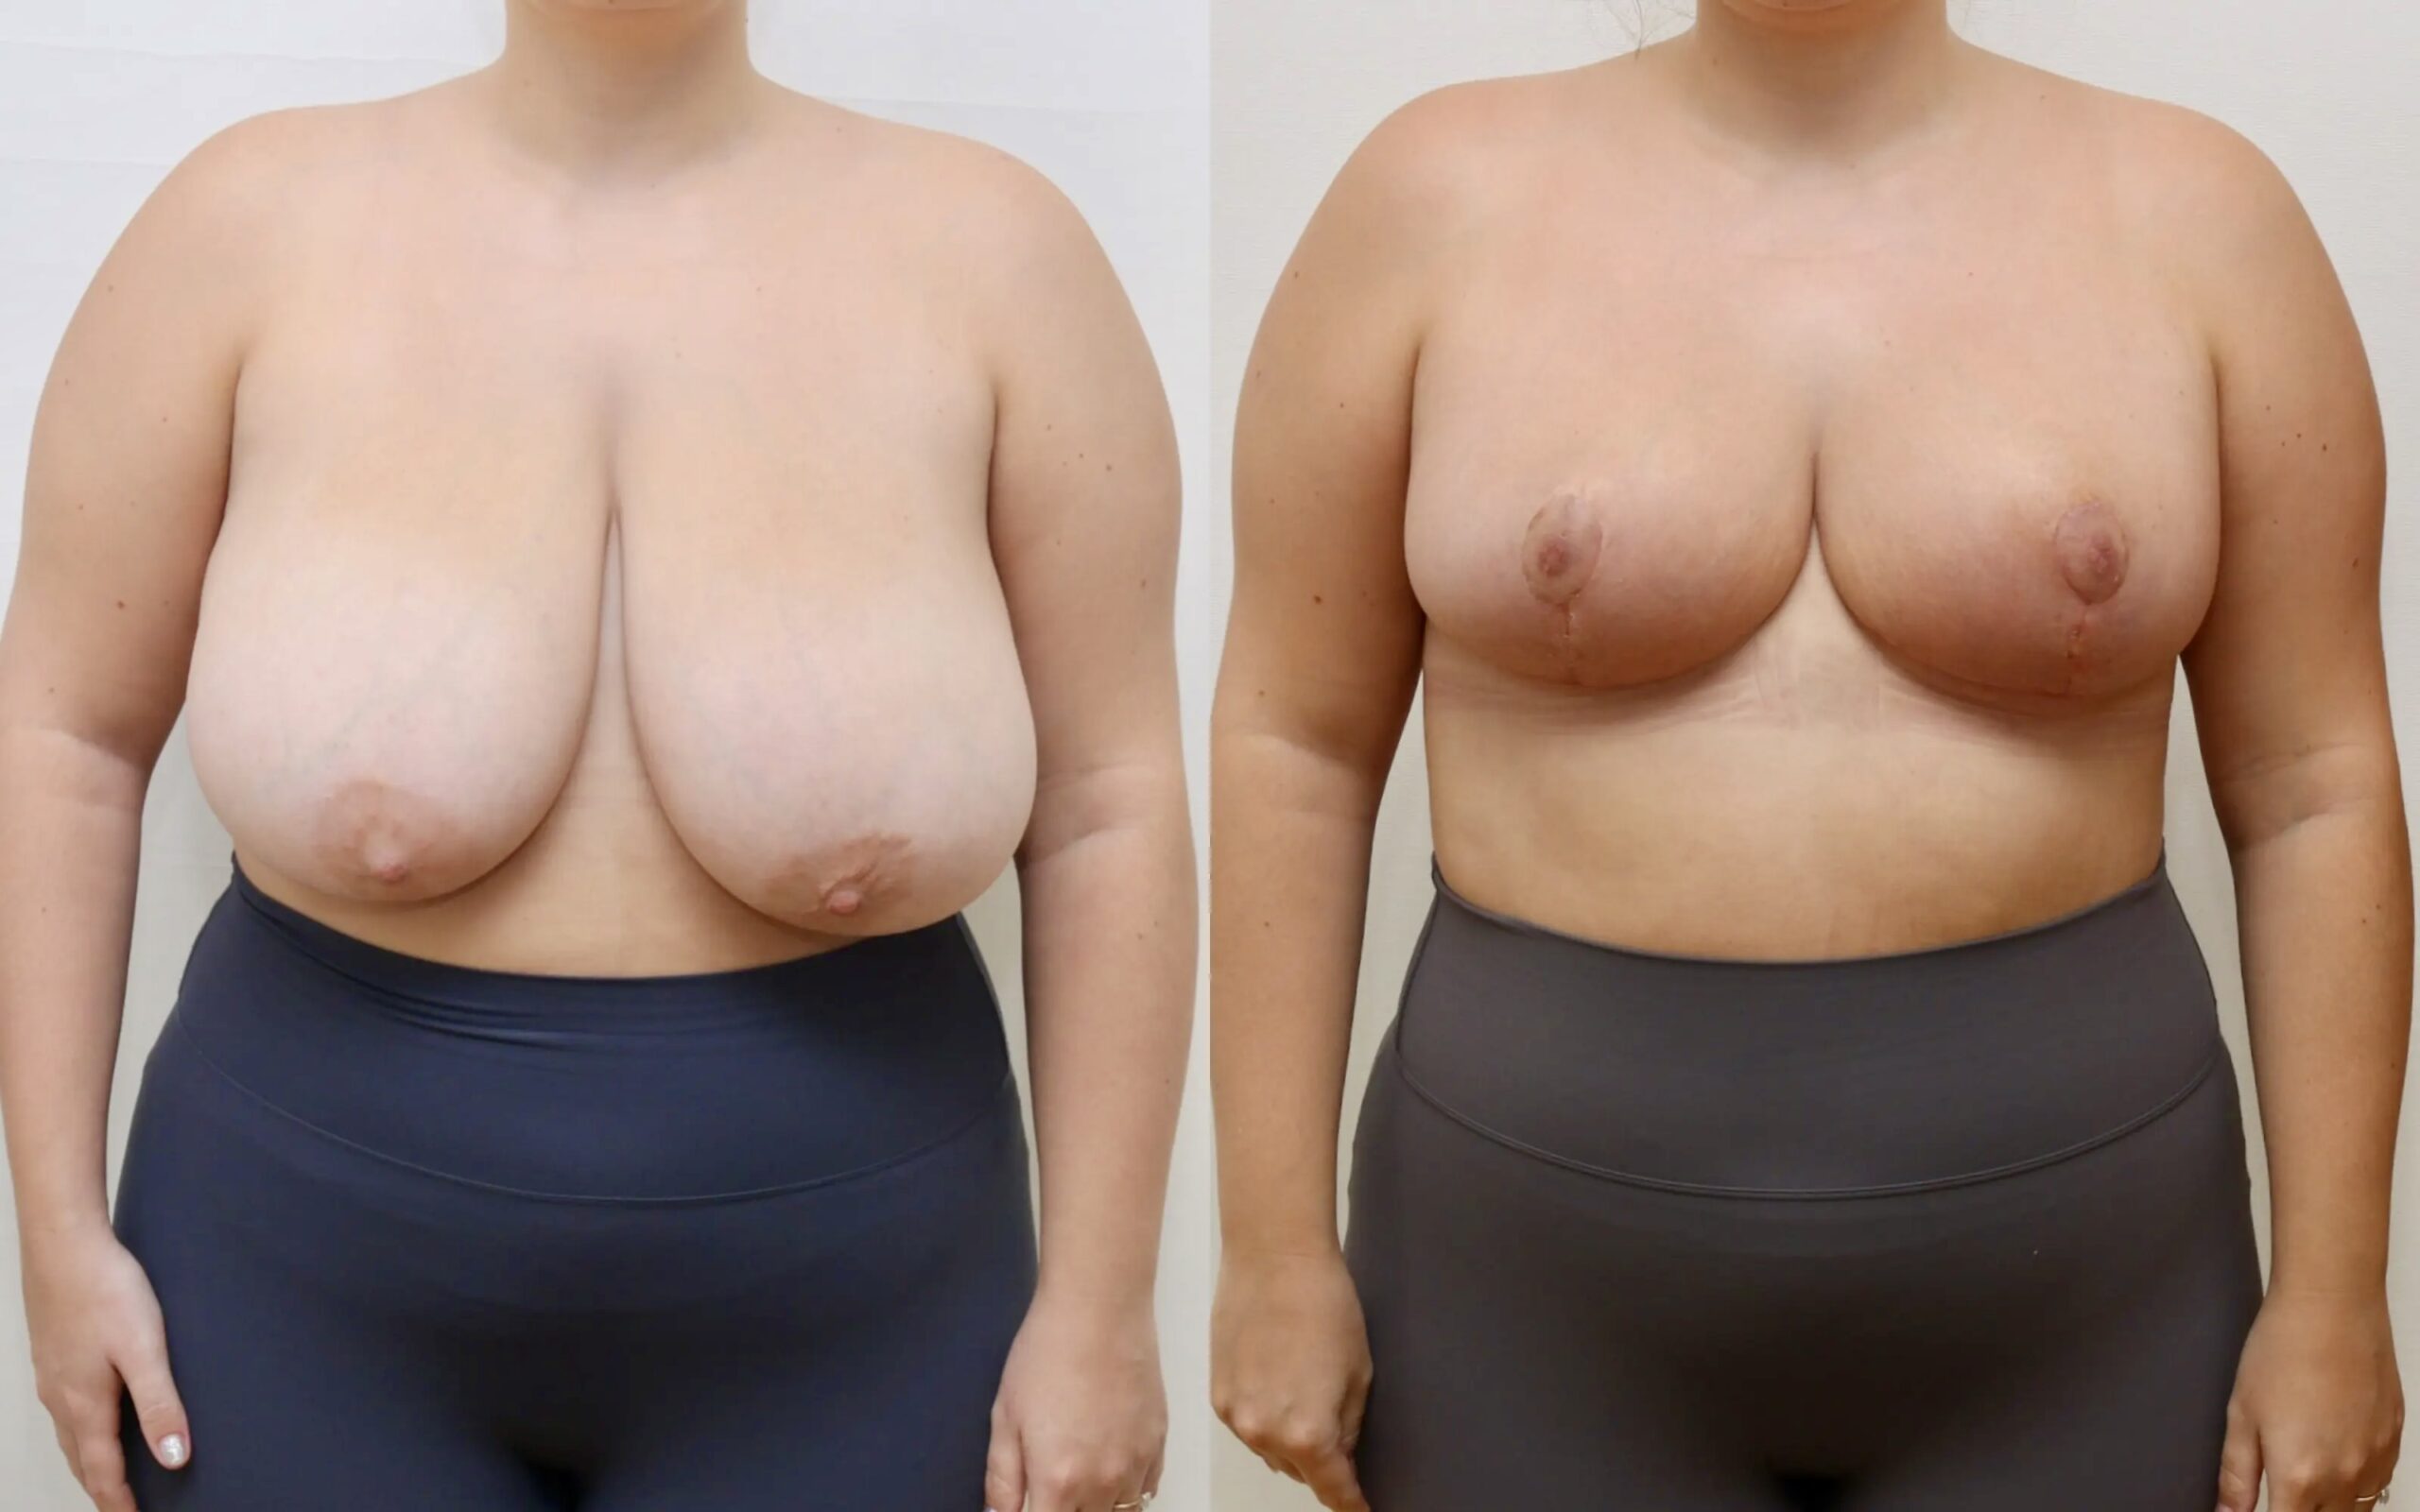 breast reduction before and after 4 weeks